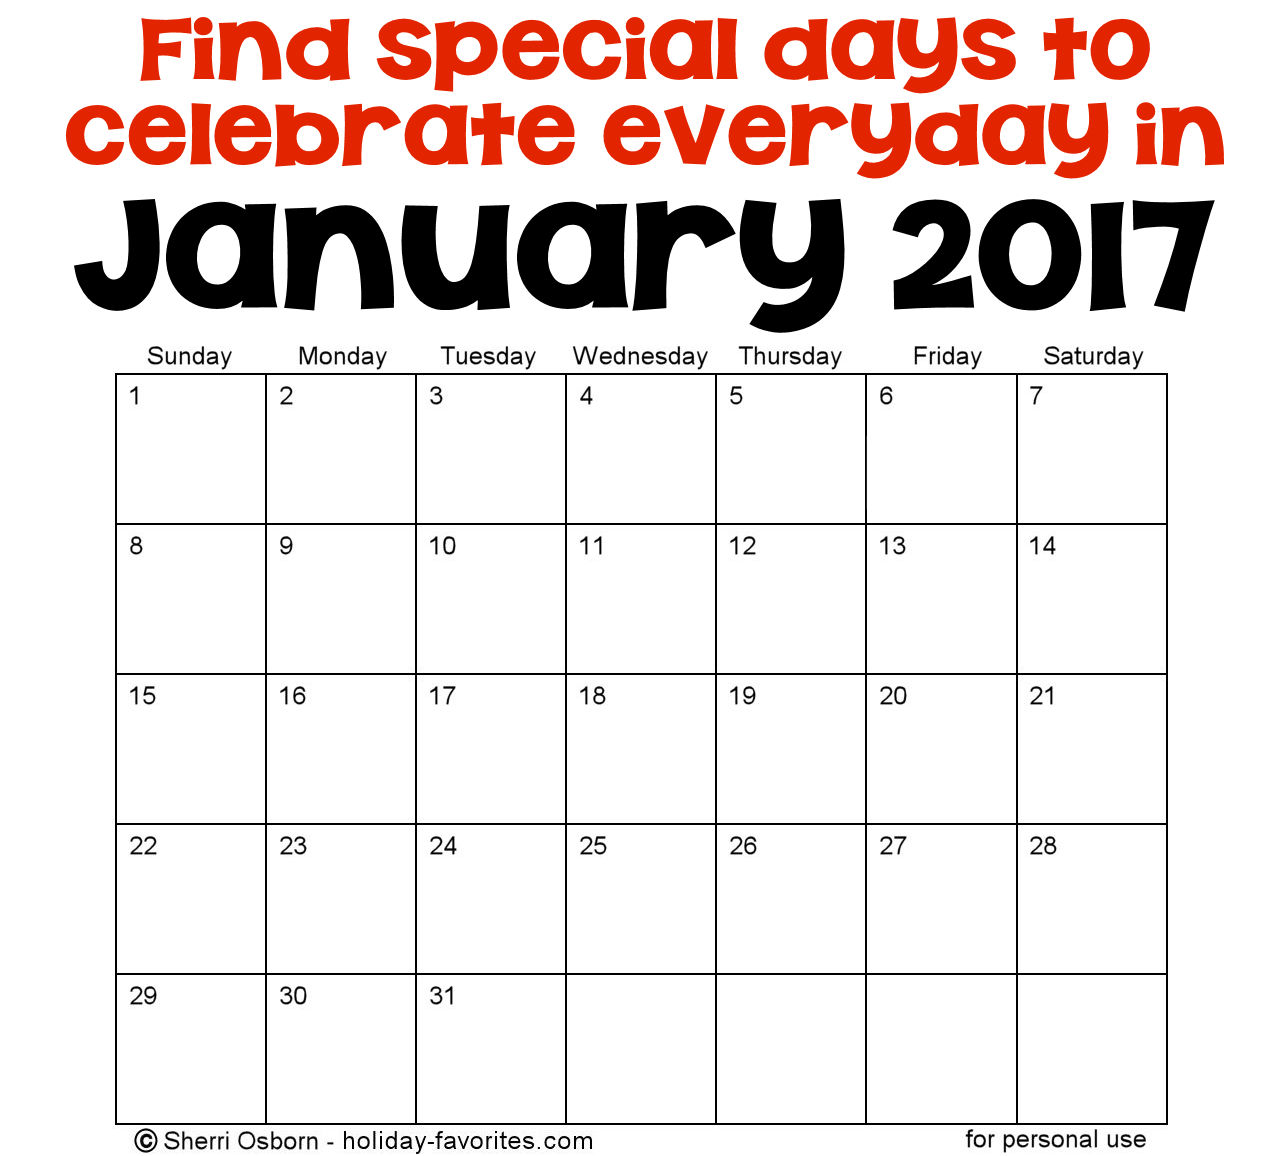 january-holidays-and-special-days-holiday-favorites